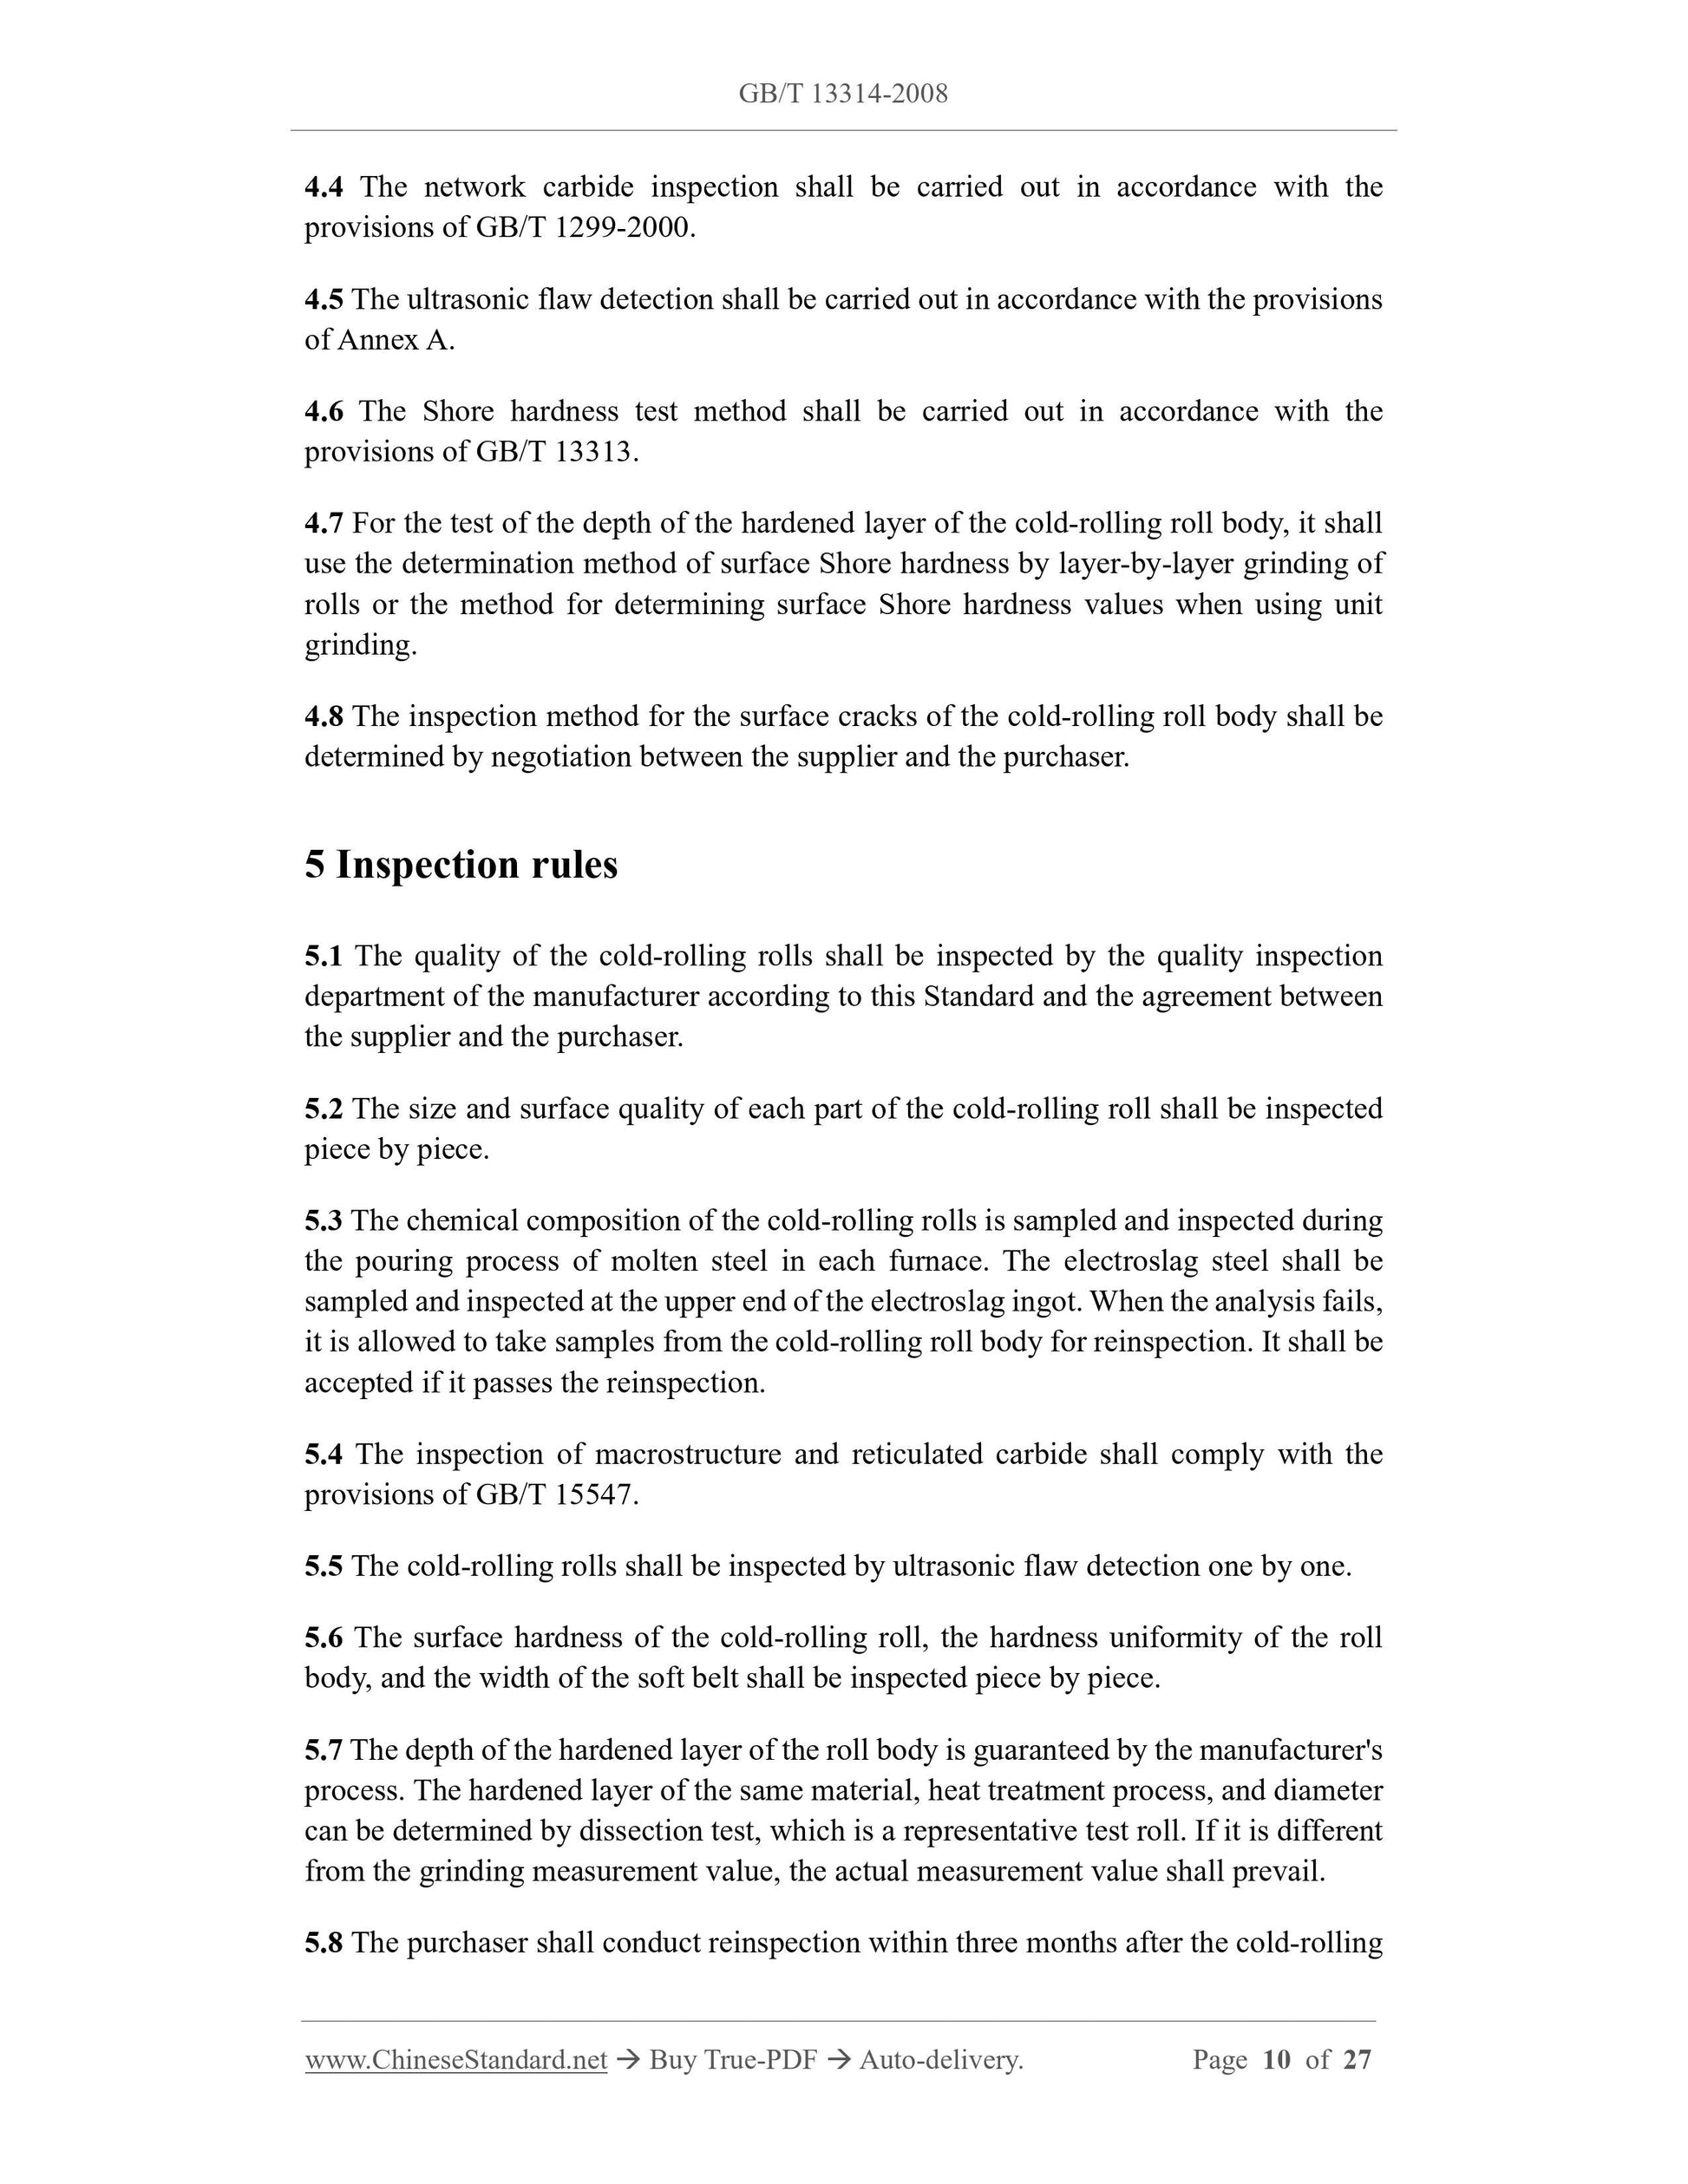 GB/T 13314-2008 Page 4